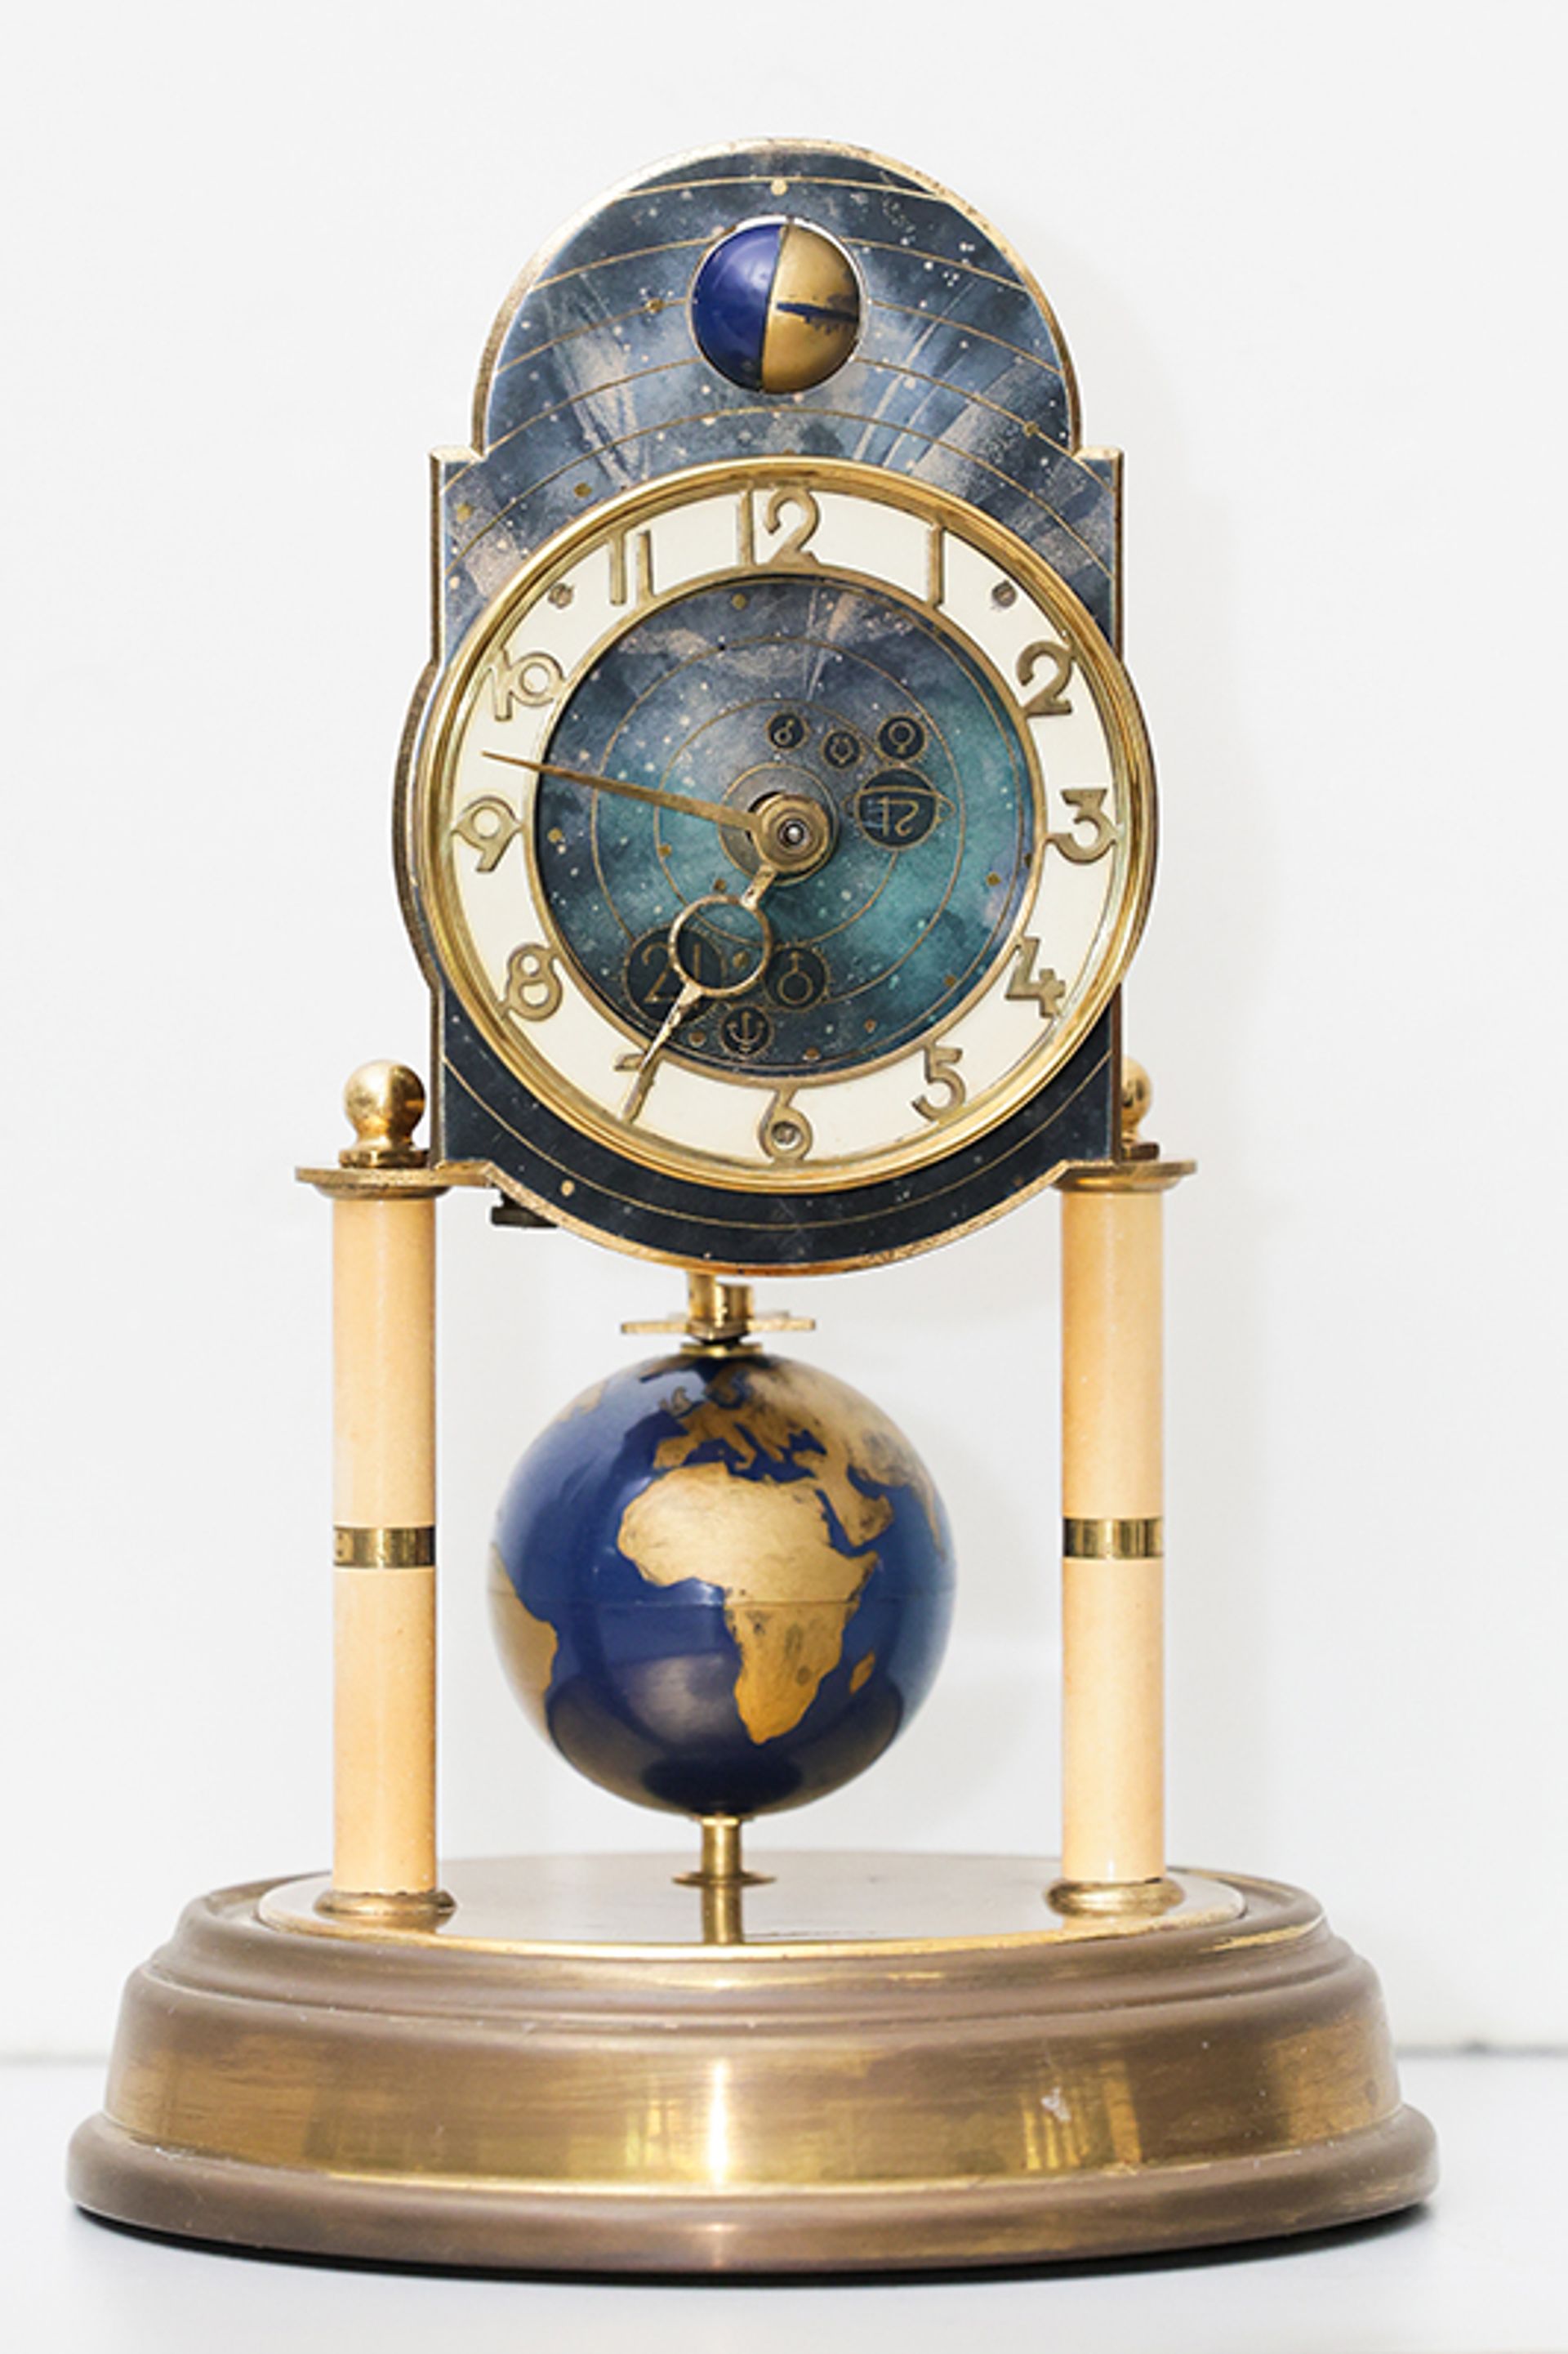 A 400-day clock made in 1954 by J Kaiser that incorporates a moon at the top to show the phase of the moon when the clock runs. It has a rare globe pendulum with regulating weights inside.